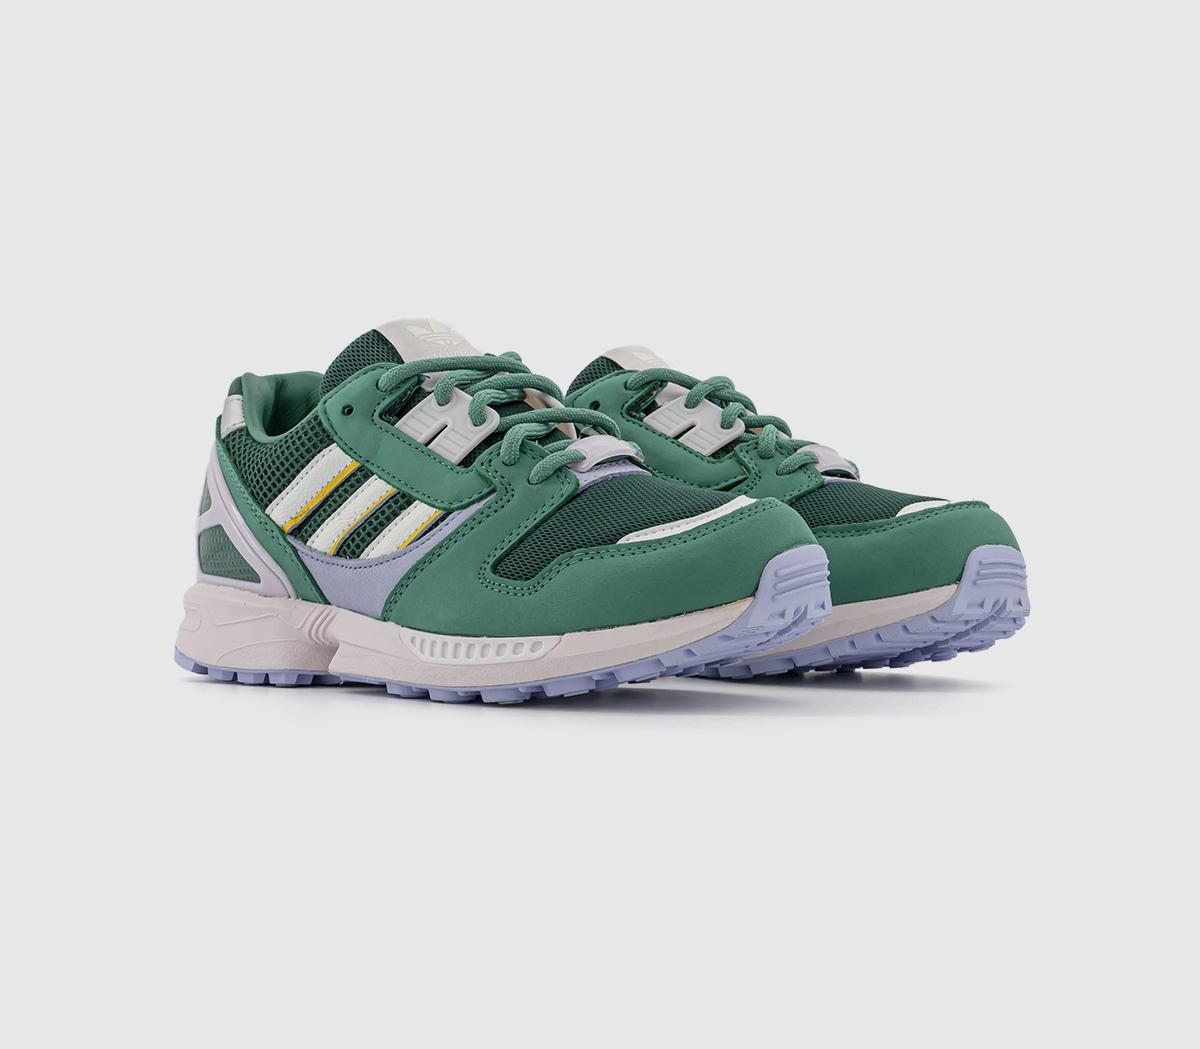 Adidas Z-x Trainers Collegiate Green Semi Court Green Almost Pink, 5.5